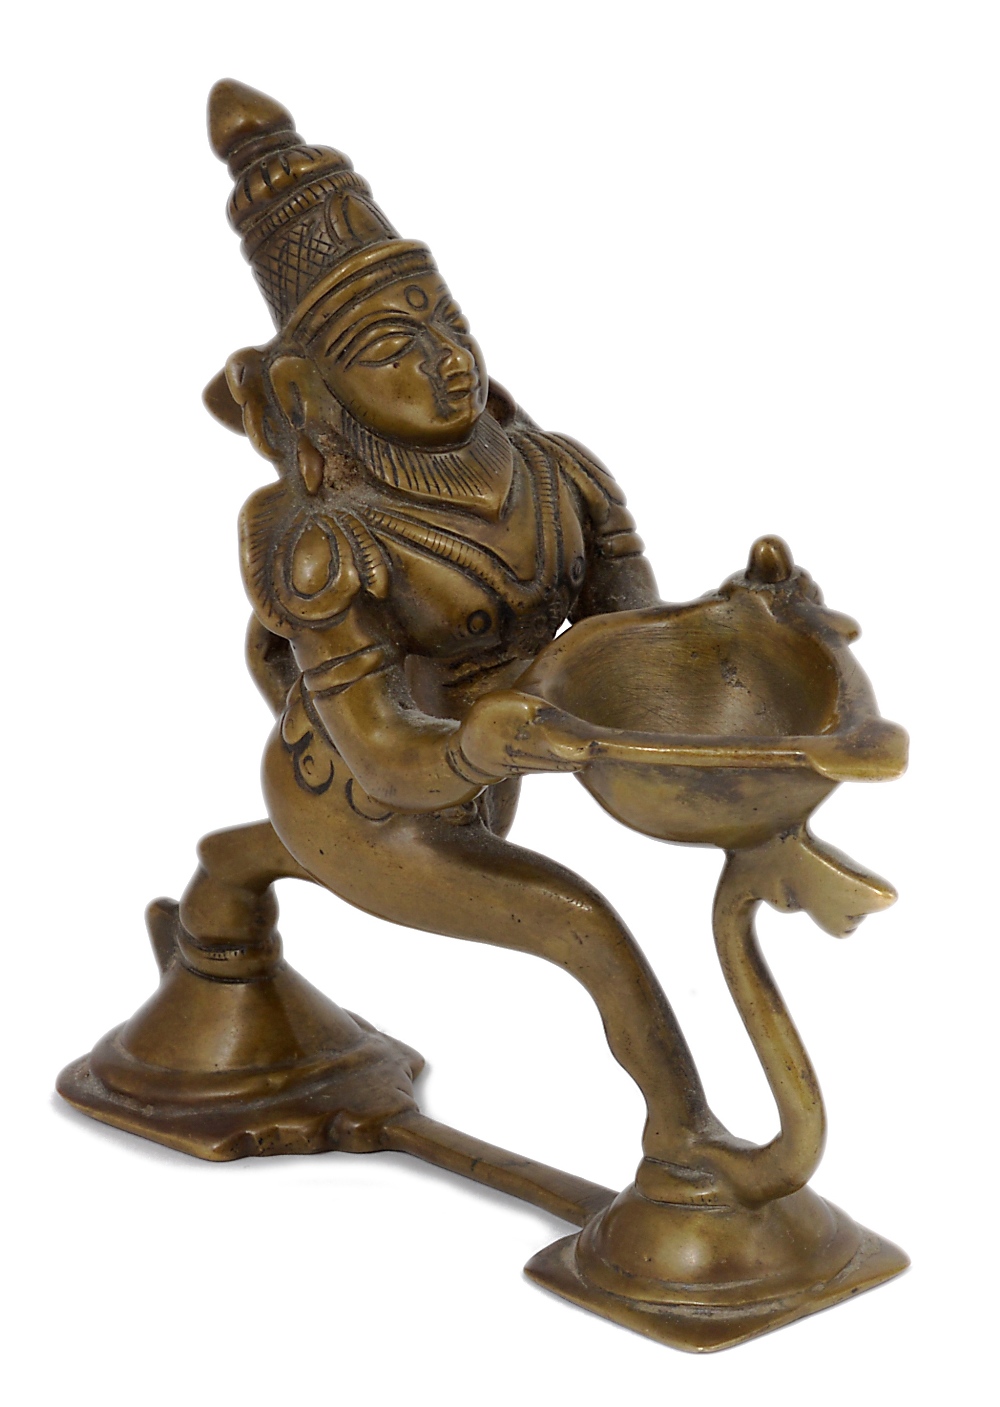 A PUJA LAMP, SOUTH INDIA, 19TH/20TH CENTURY in the form of Hanuman, with scrolling tail, his lamp